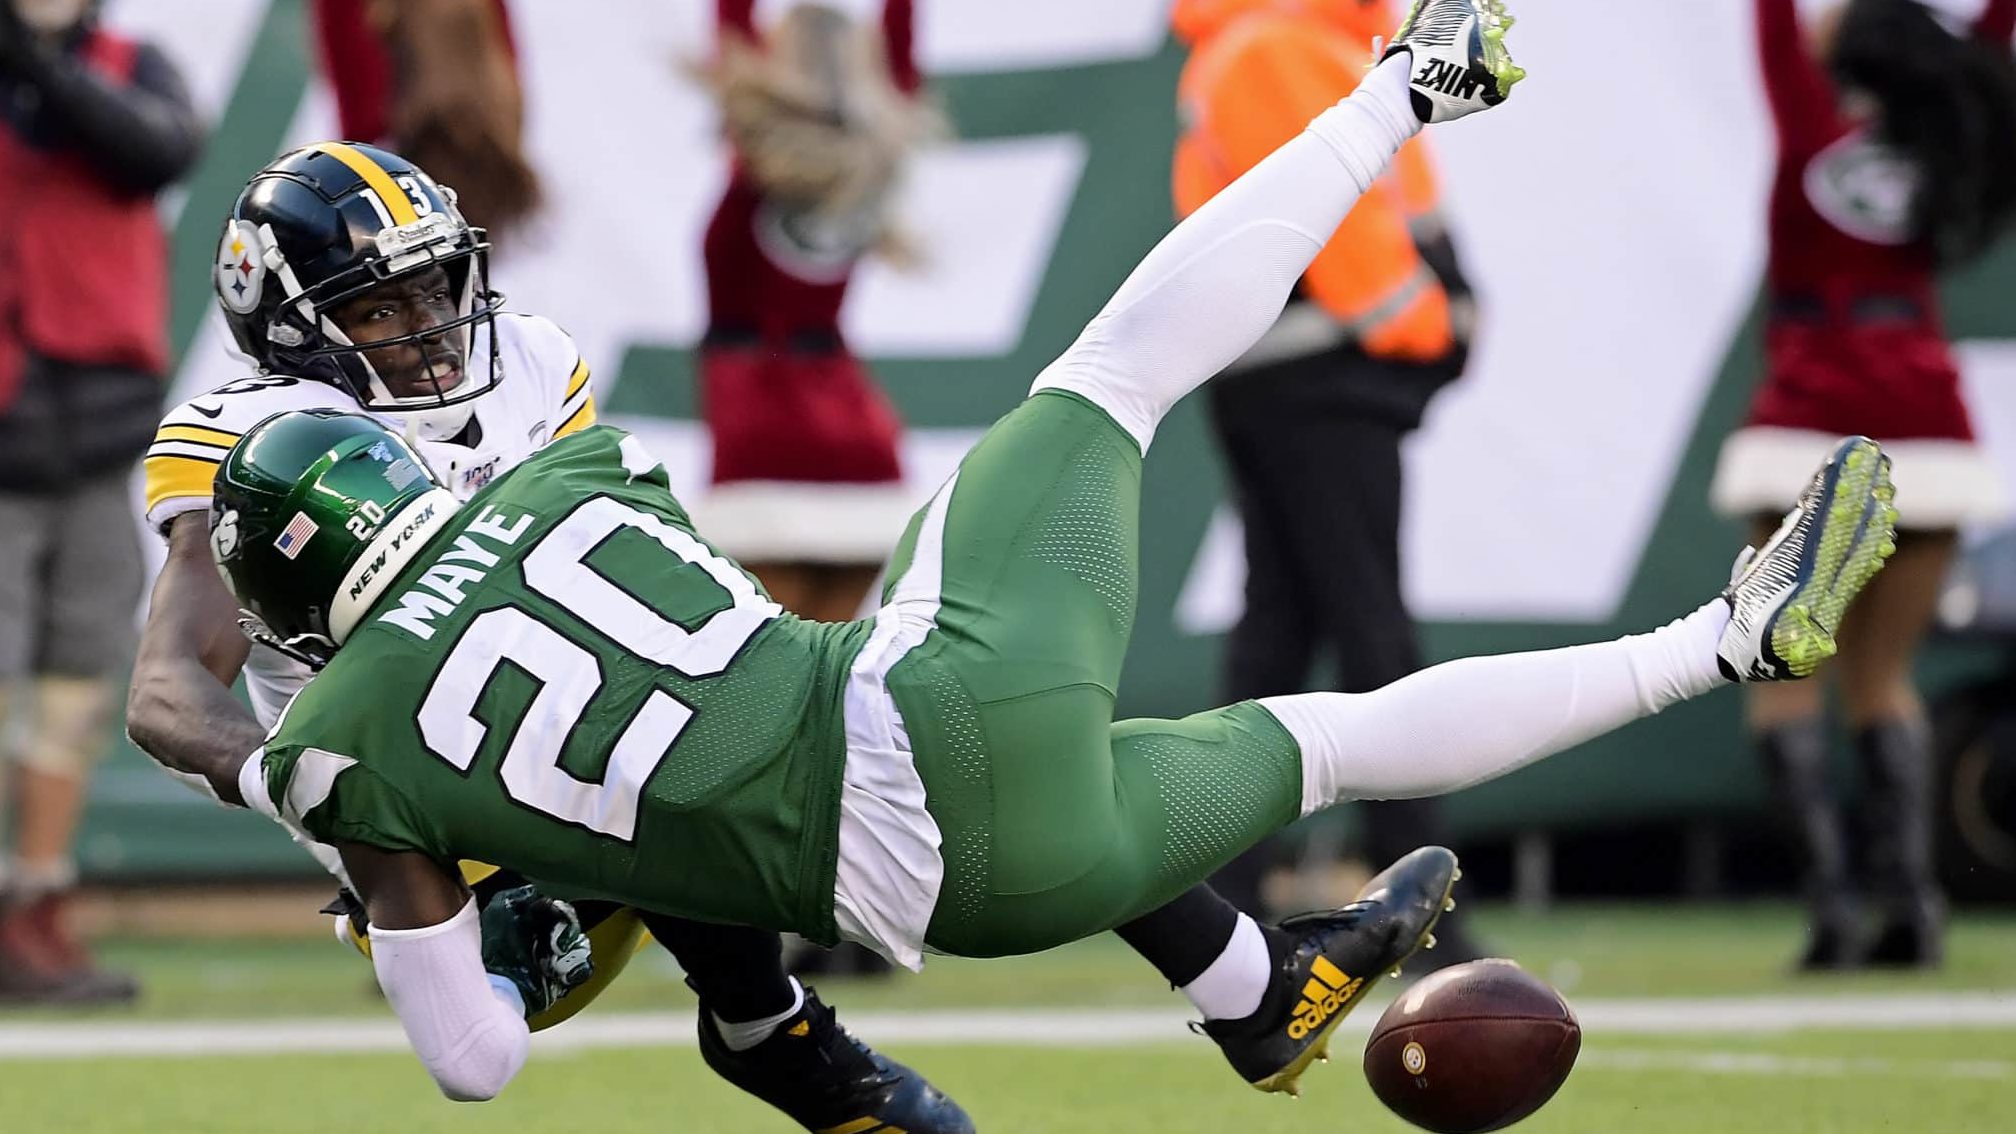 EAST RUTHERFORD, NEW JERSEY - DECEMBER 22: Marcus Maye #20 of the New York Jets breaks up a pass intended for James Washington #13 of the Pittsburgh Steelers during the second half at MetLife Stadium on December 22, 2019 in East Rutherford, New Jersey.